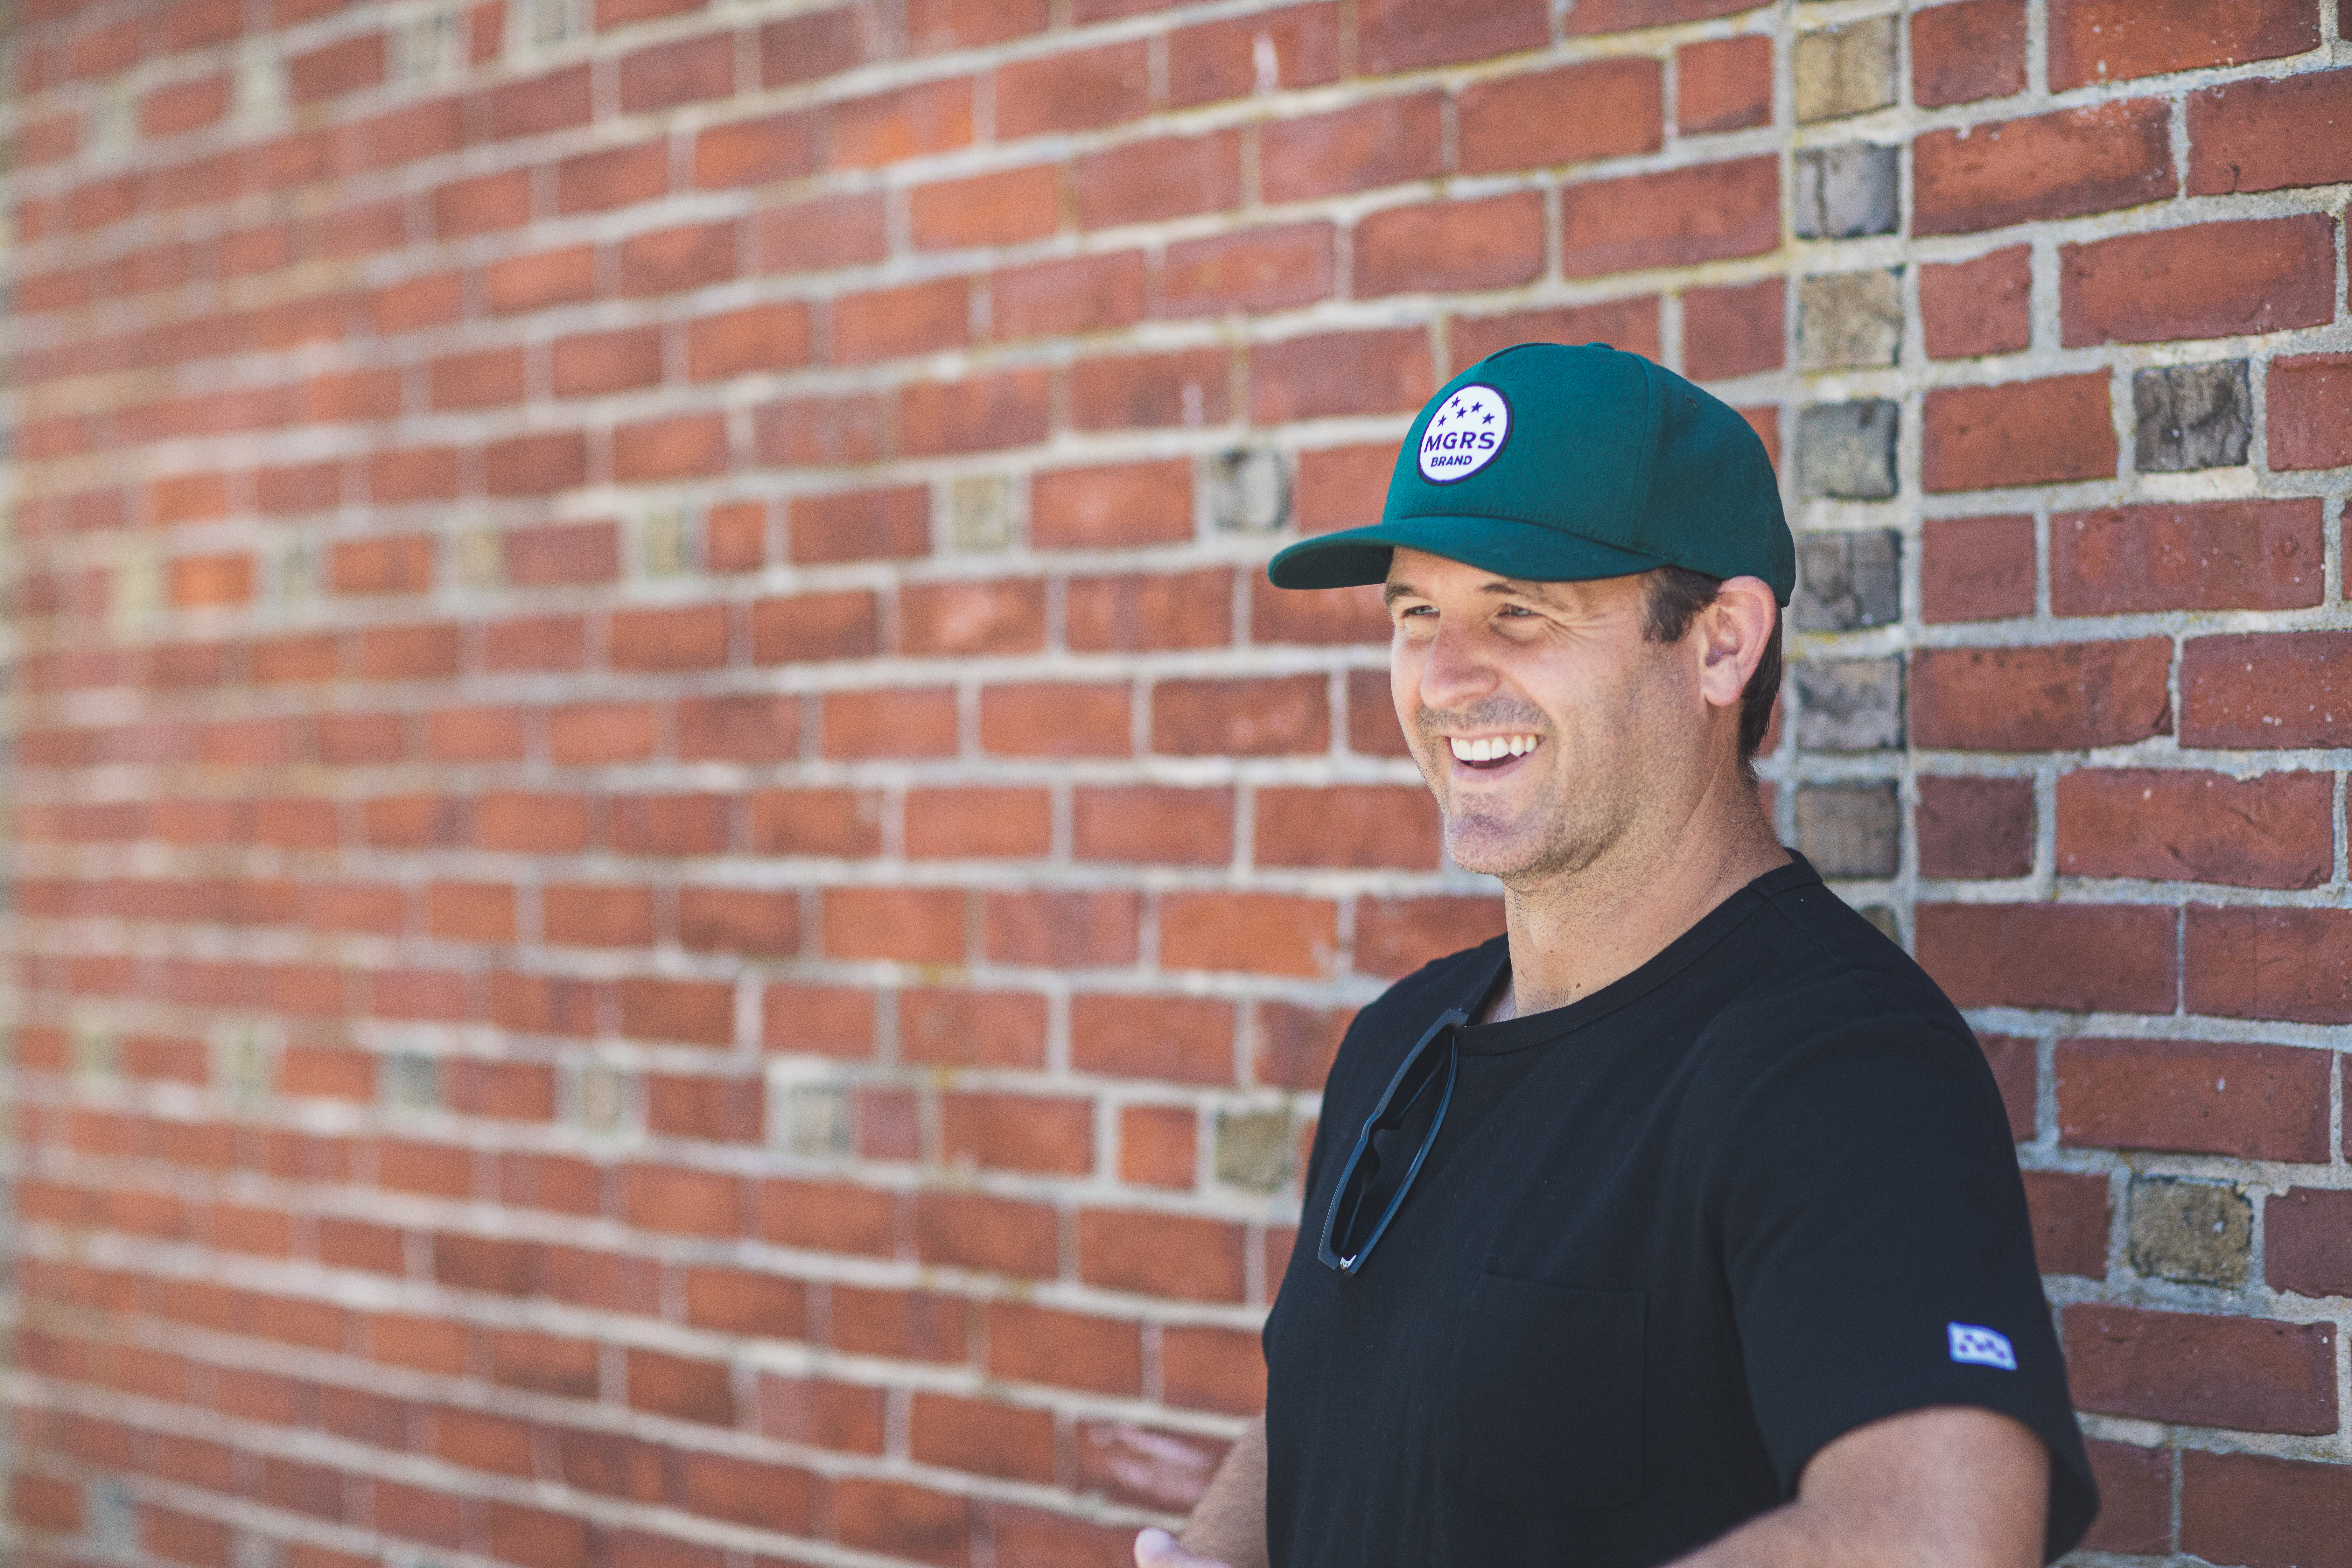 MGRS Brand founder Jamie Wallace stands in front of a brick wall wearing a green baseball hat